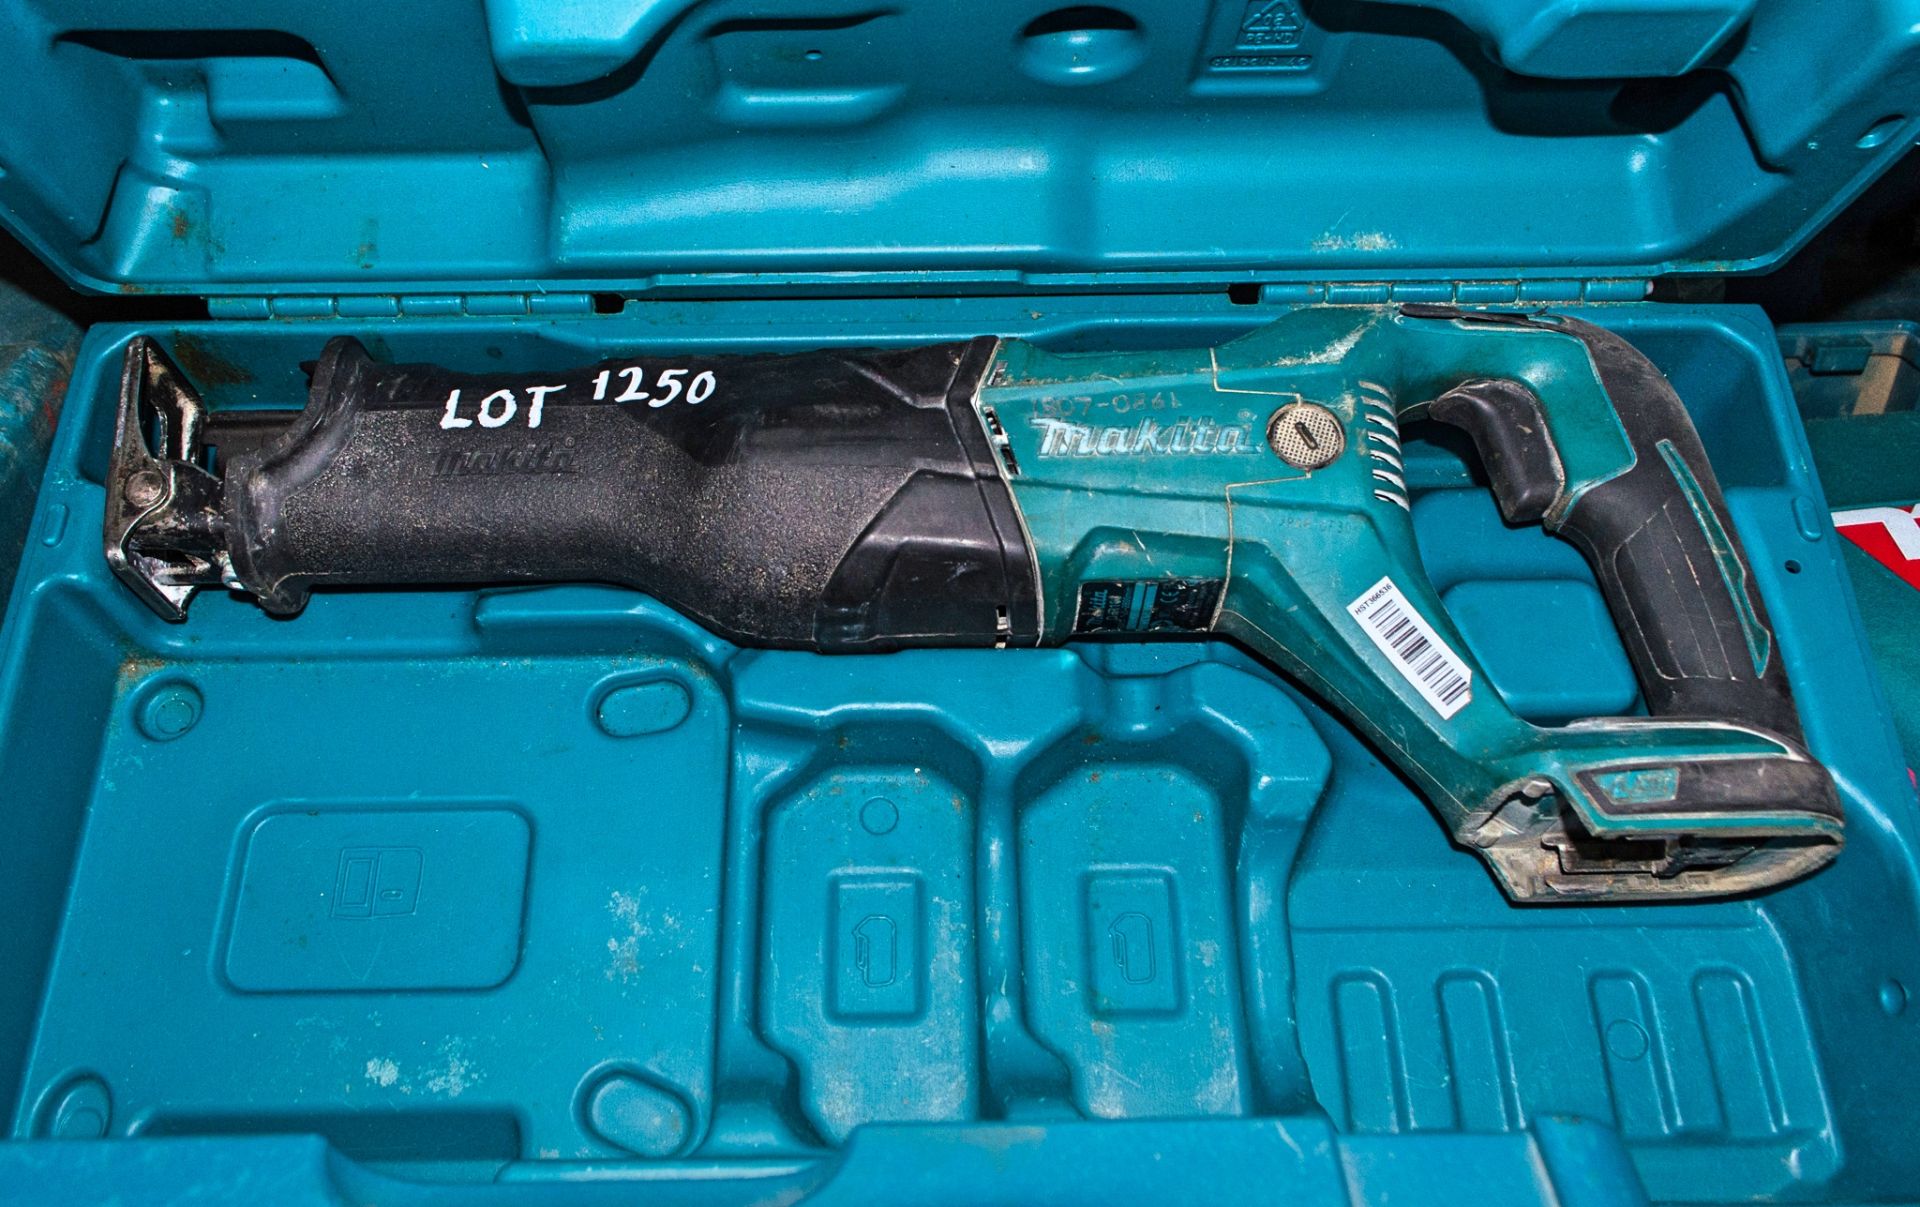 Makita DJR186 18v cordless reciprocating saw c/w carry case ** No battery or charger 18070861